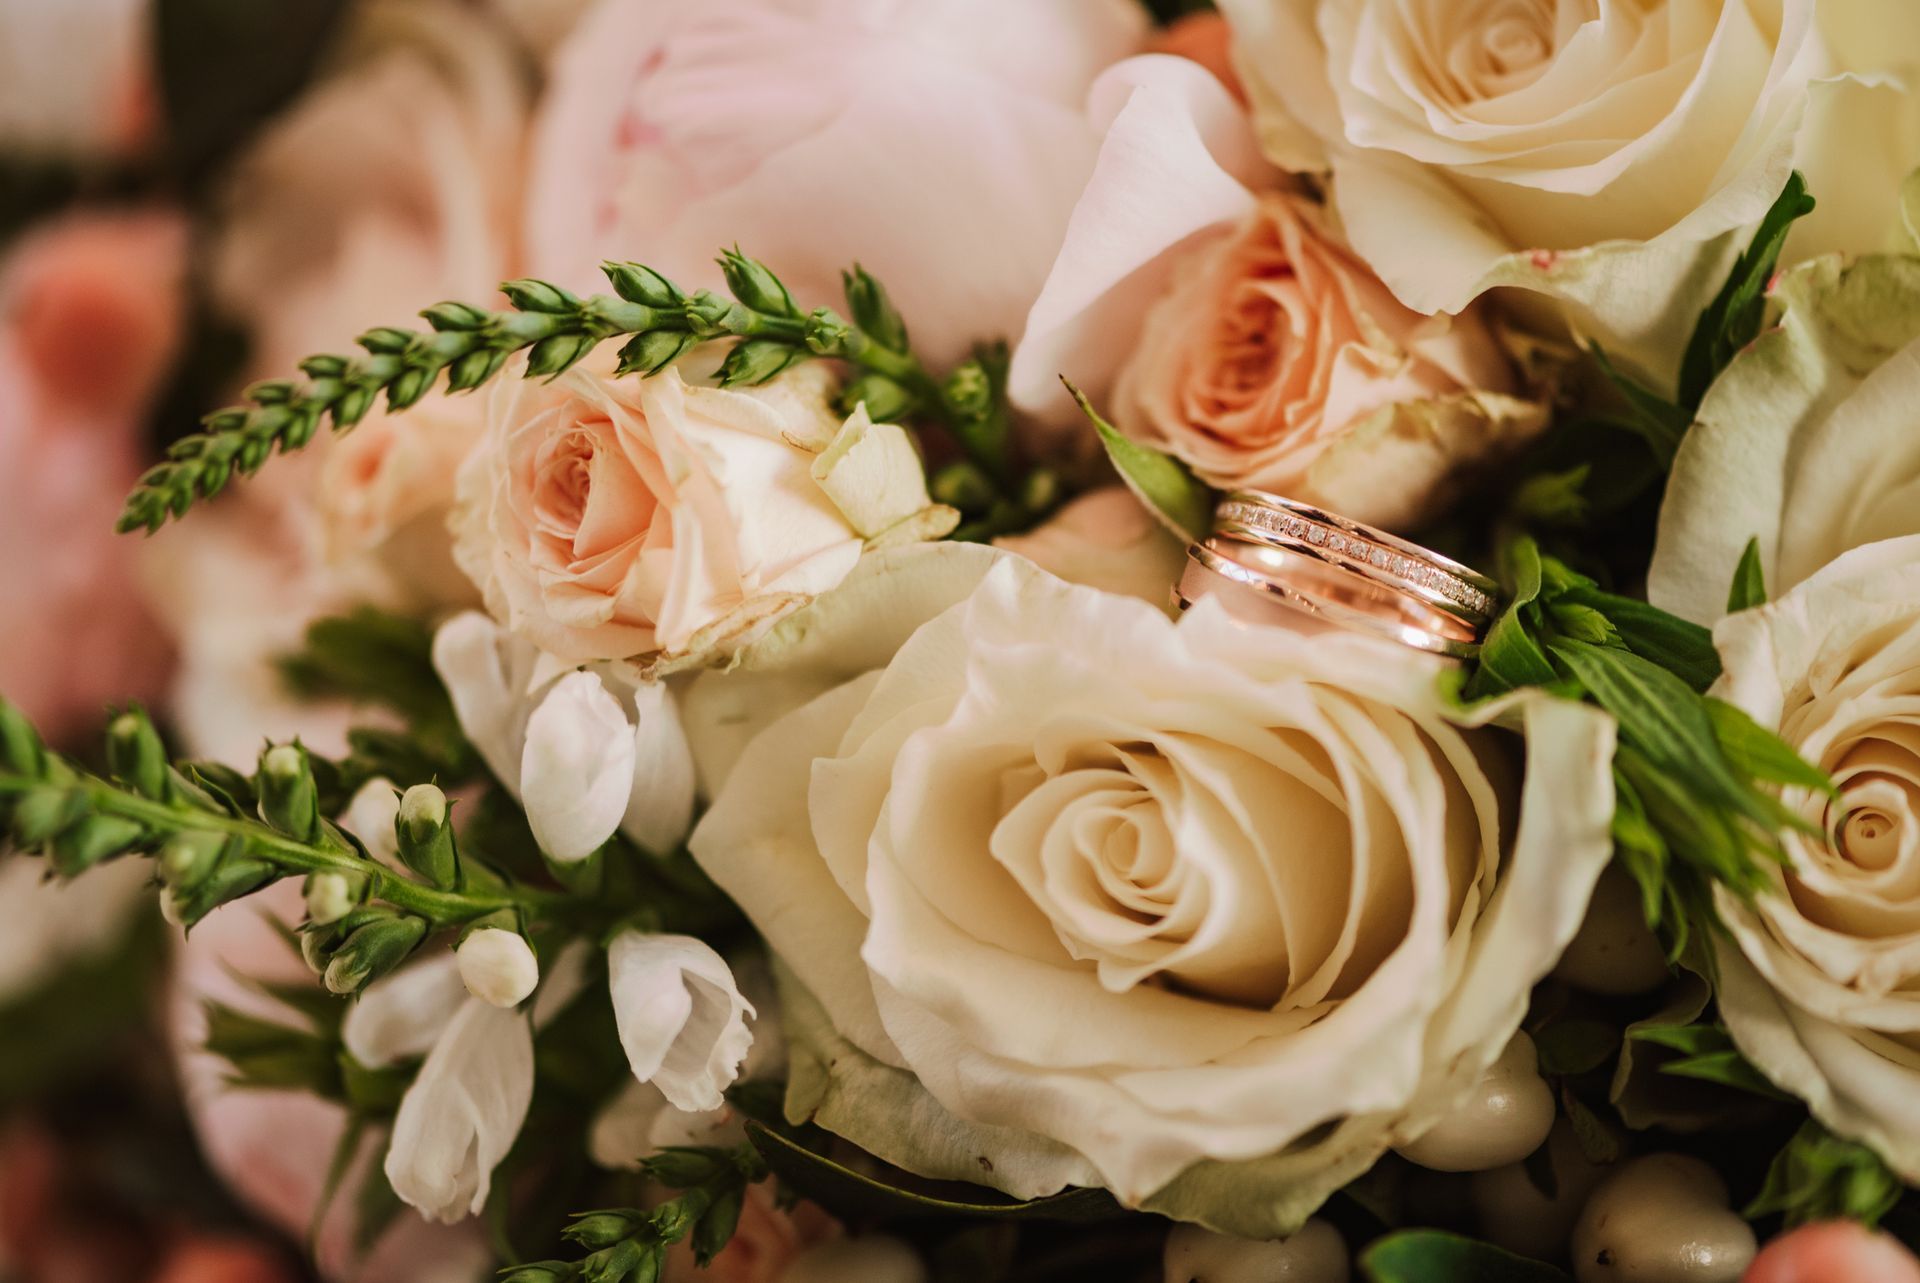 The wedding rings are sitting on top of a bouquet of roses.